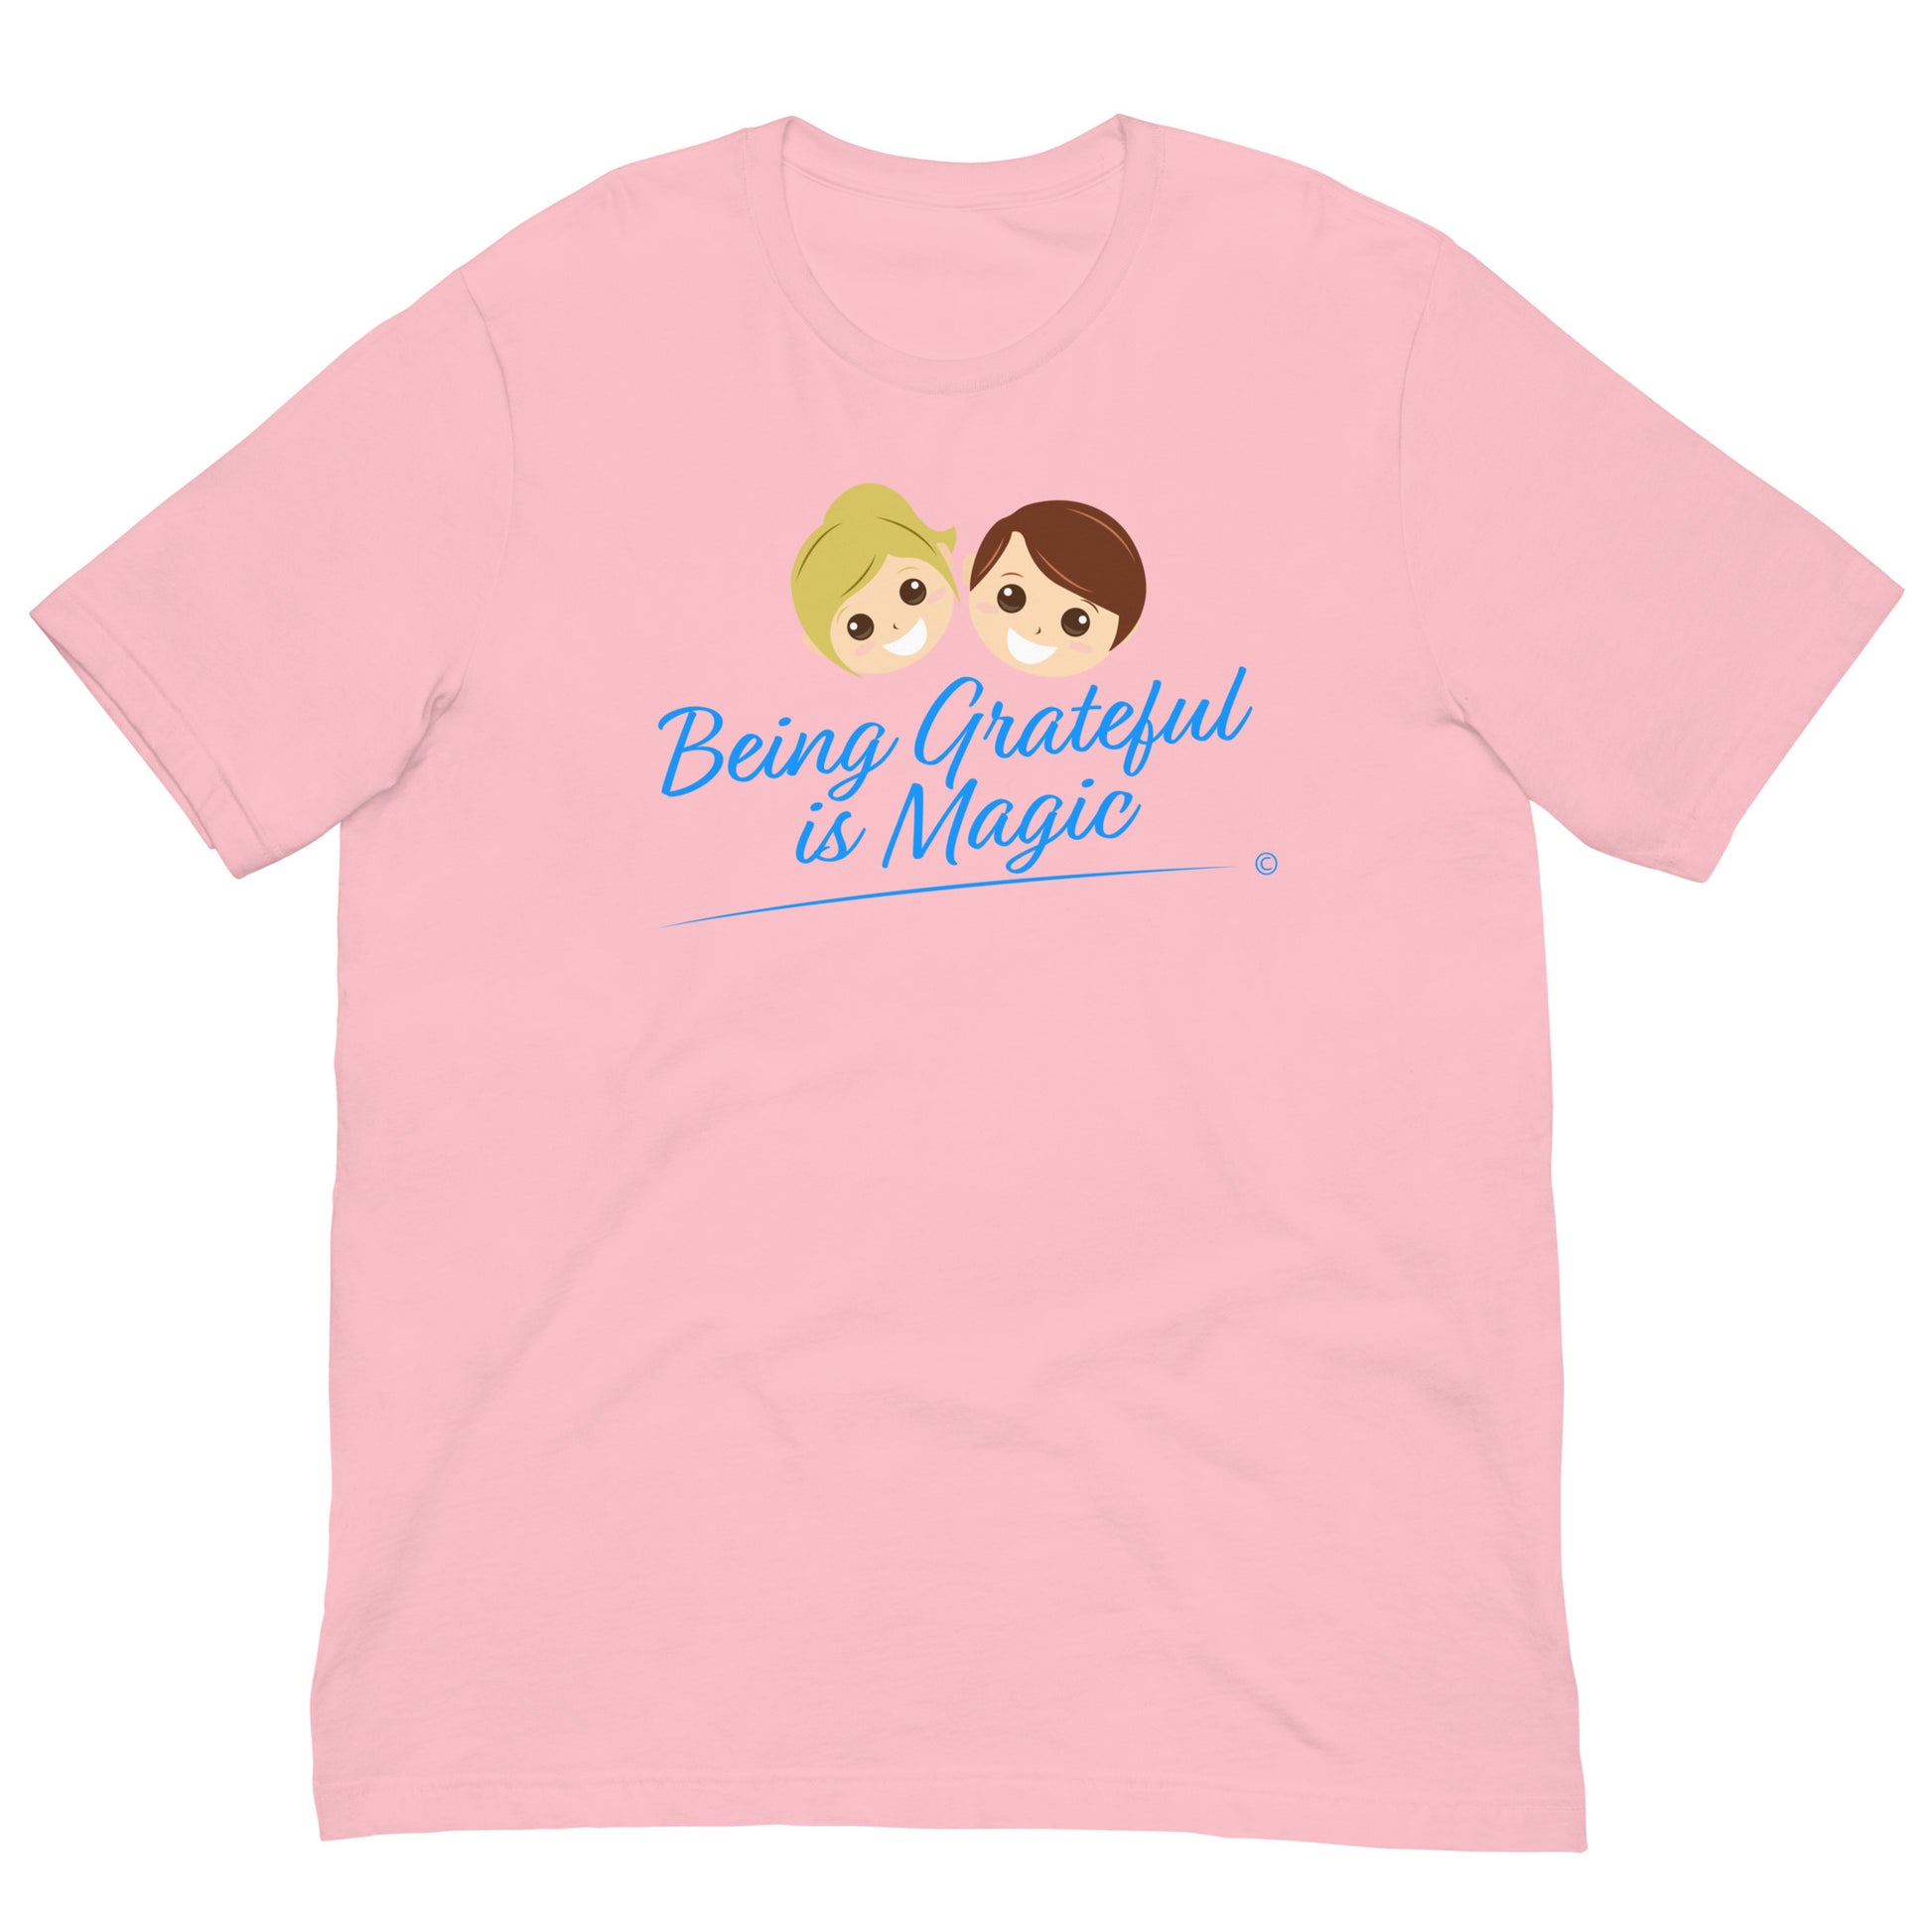 Lounge-worthy relaxed top - Pink Unisex Shirt